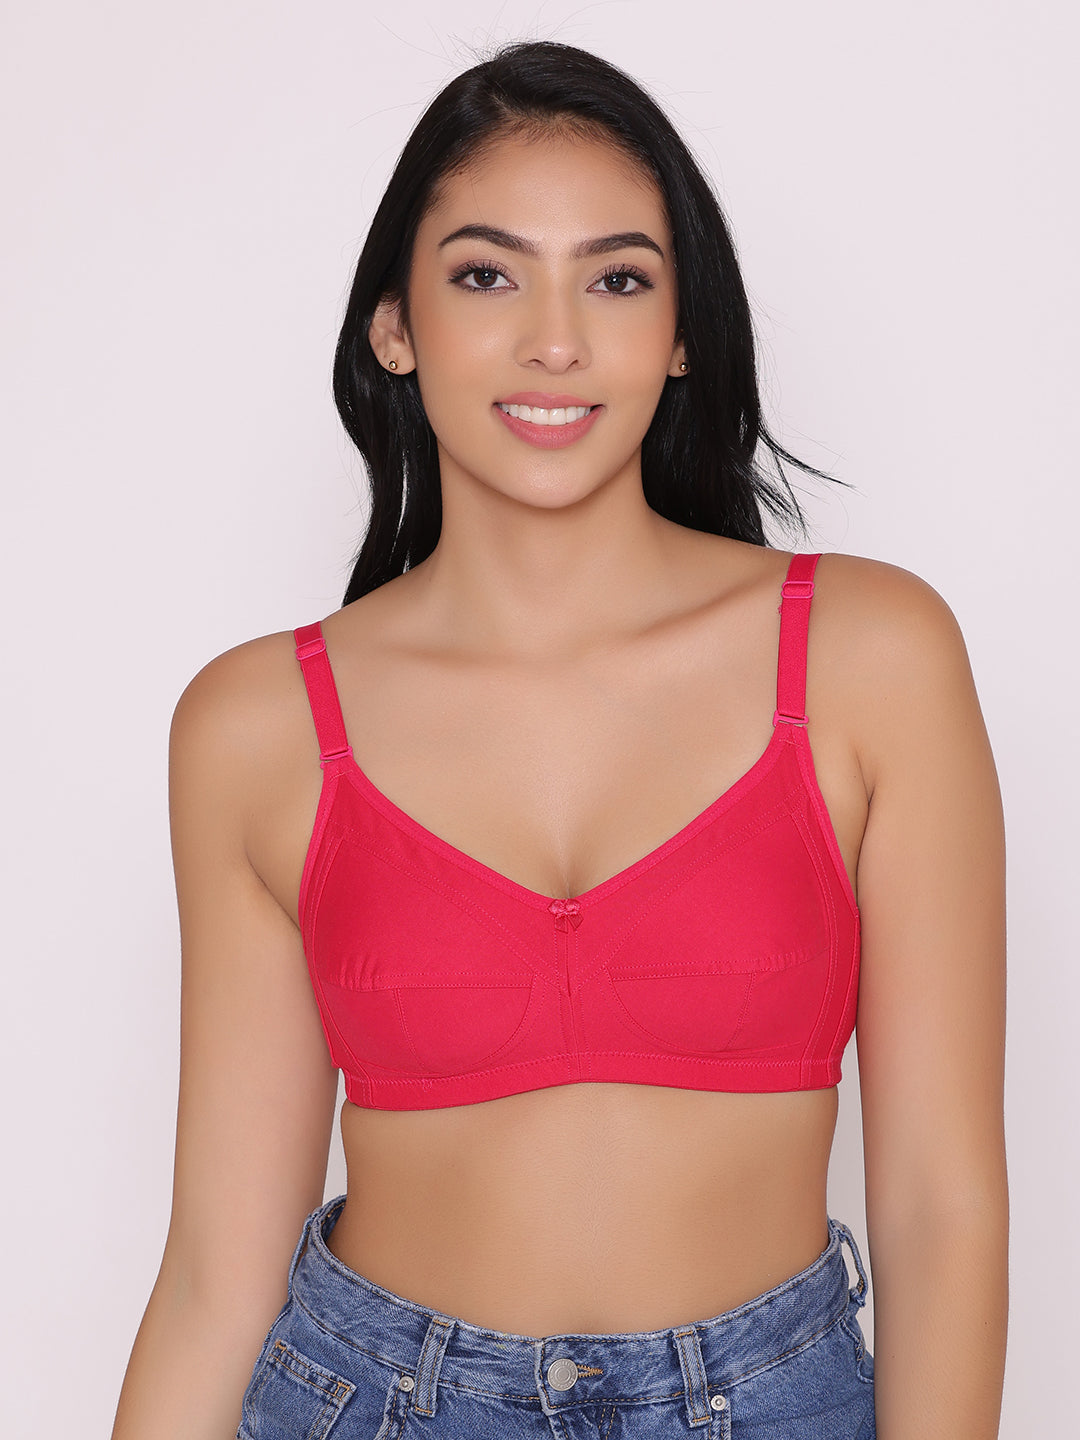 DYMA Women�s Non Padded Full Coverage Seamed Minimizer Cotton Bra for  Everyday, Daily use, Dailywear